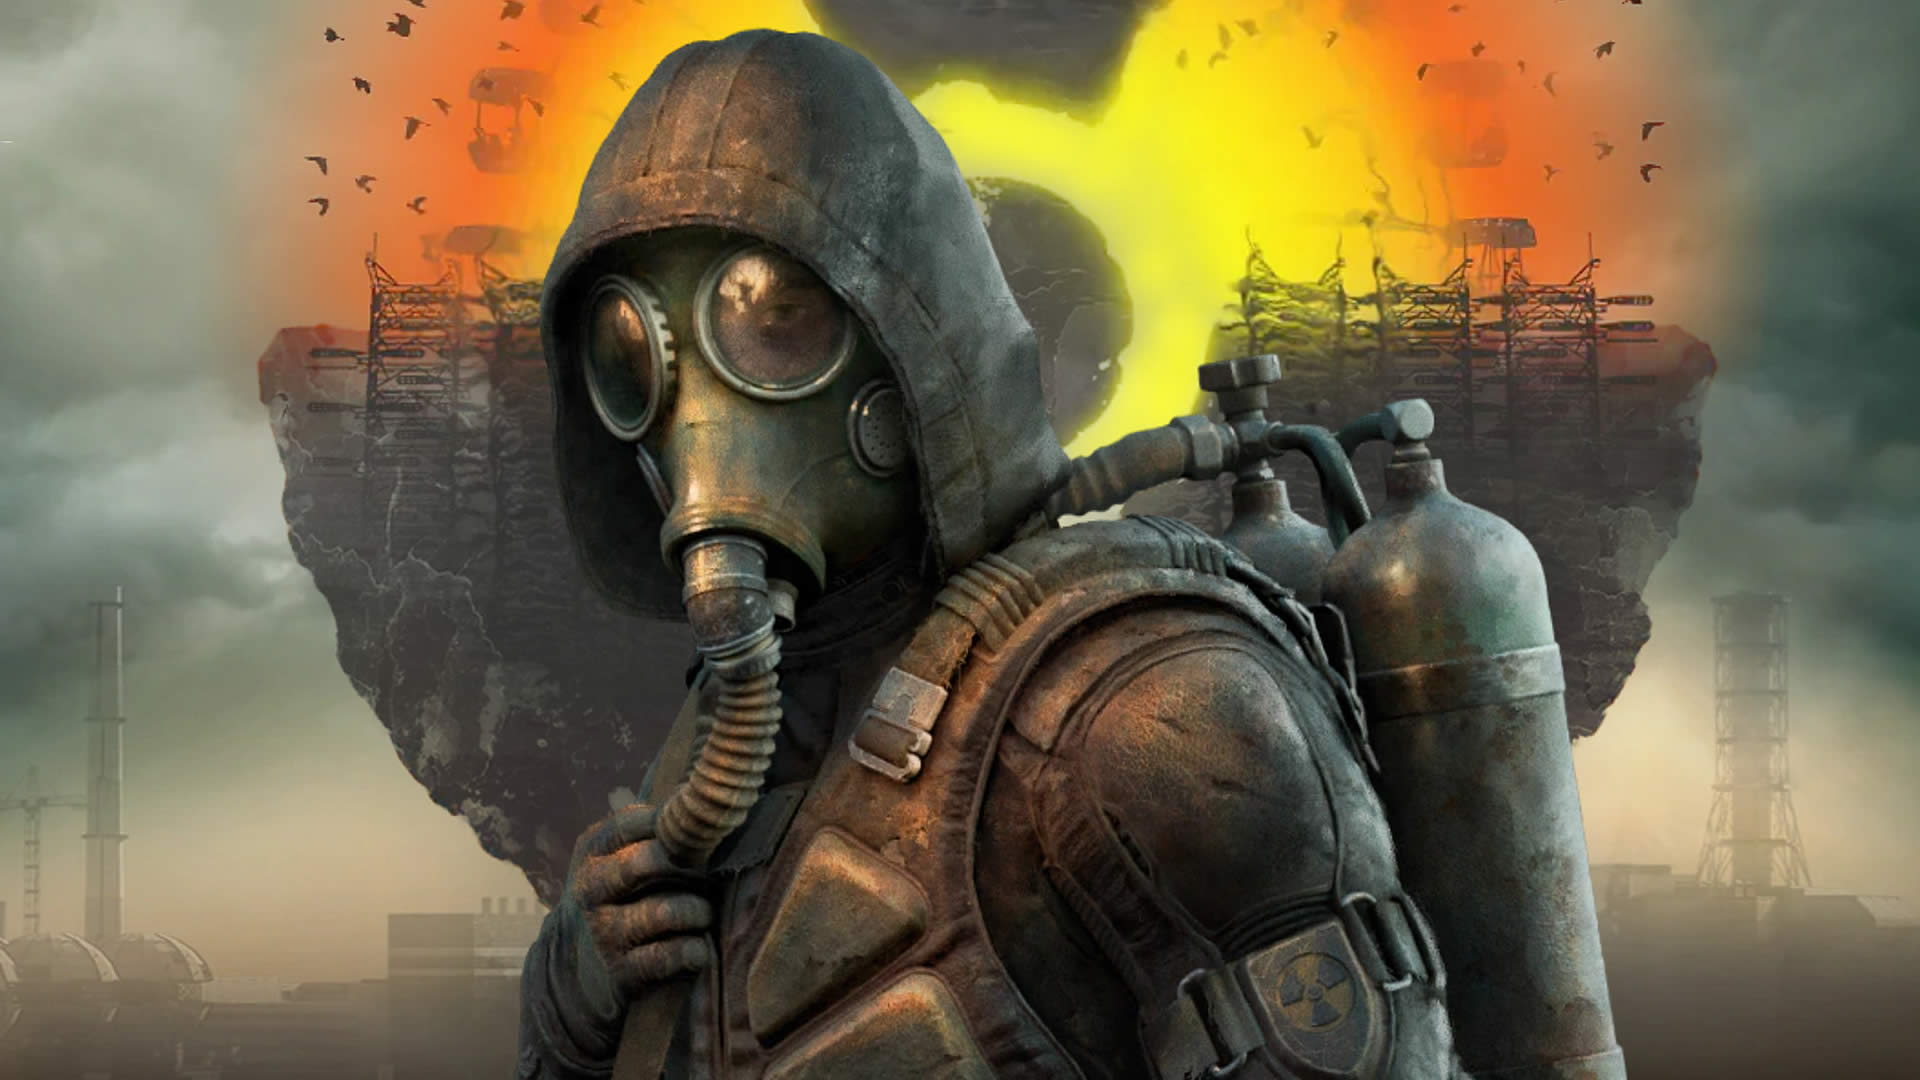  S.T.A.L.K.E.R. 2: Heart of Chornobyl Collector's